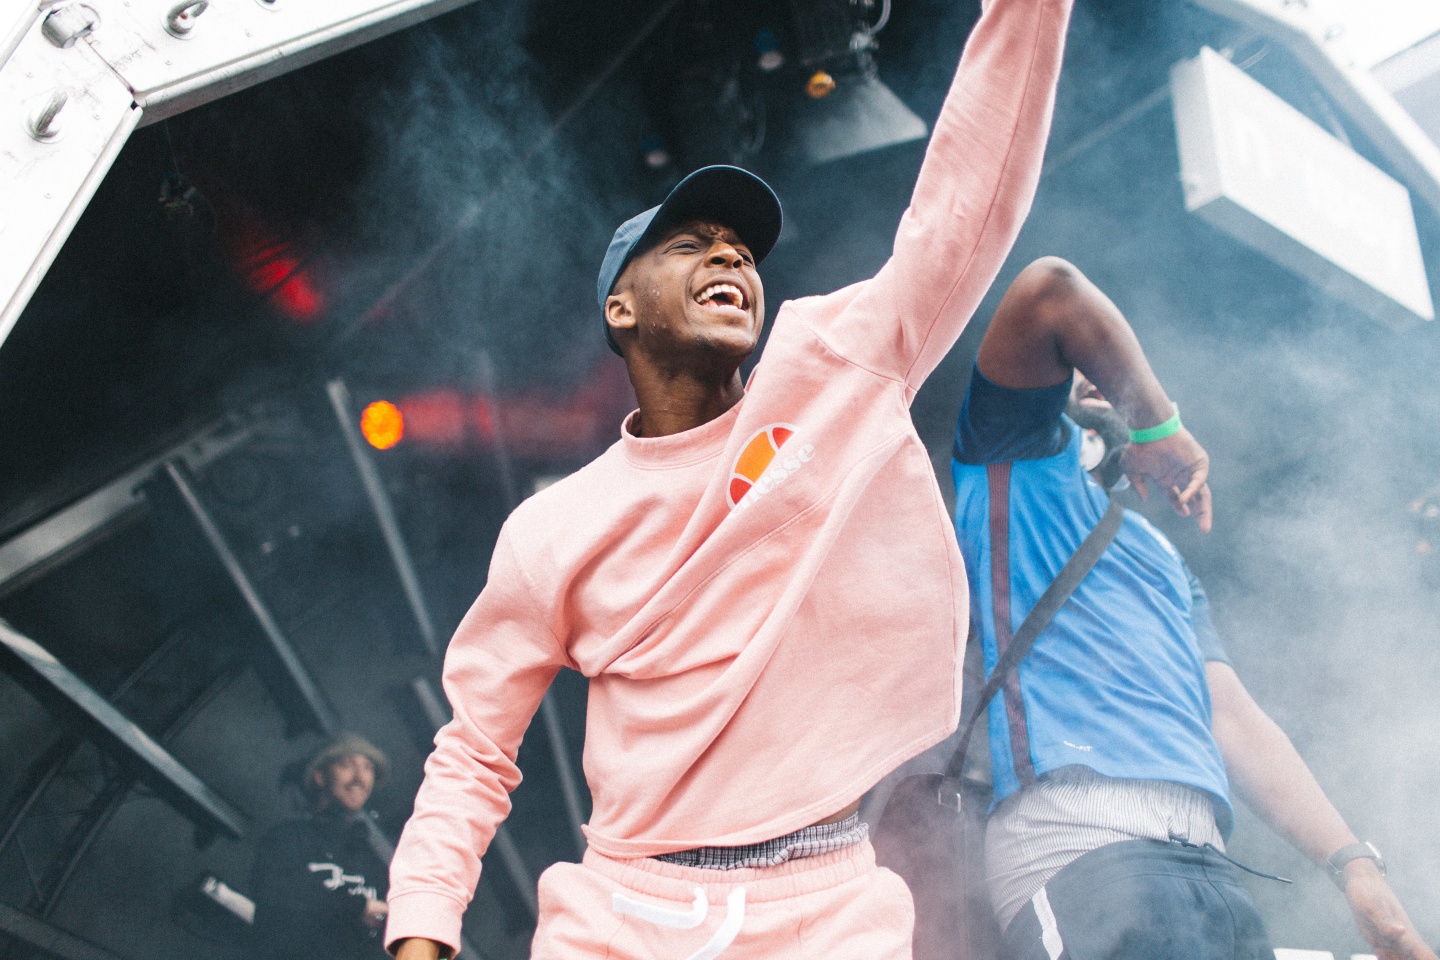 All The Looks You Need To See From Amsterdam’s Premier Hip-Hop Festival